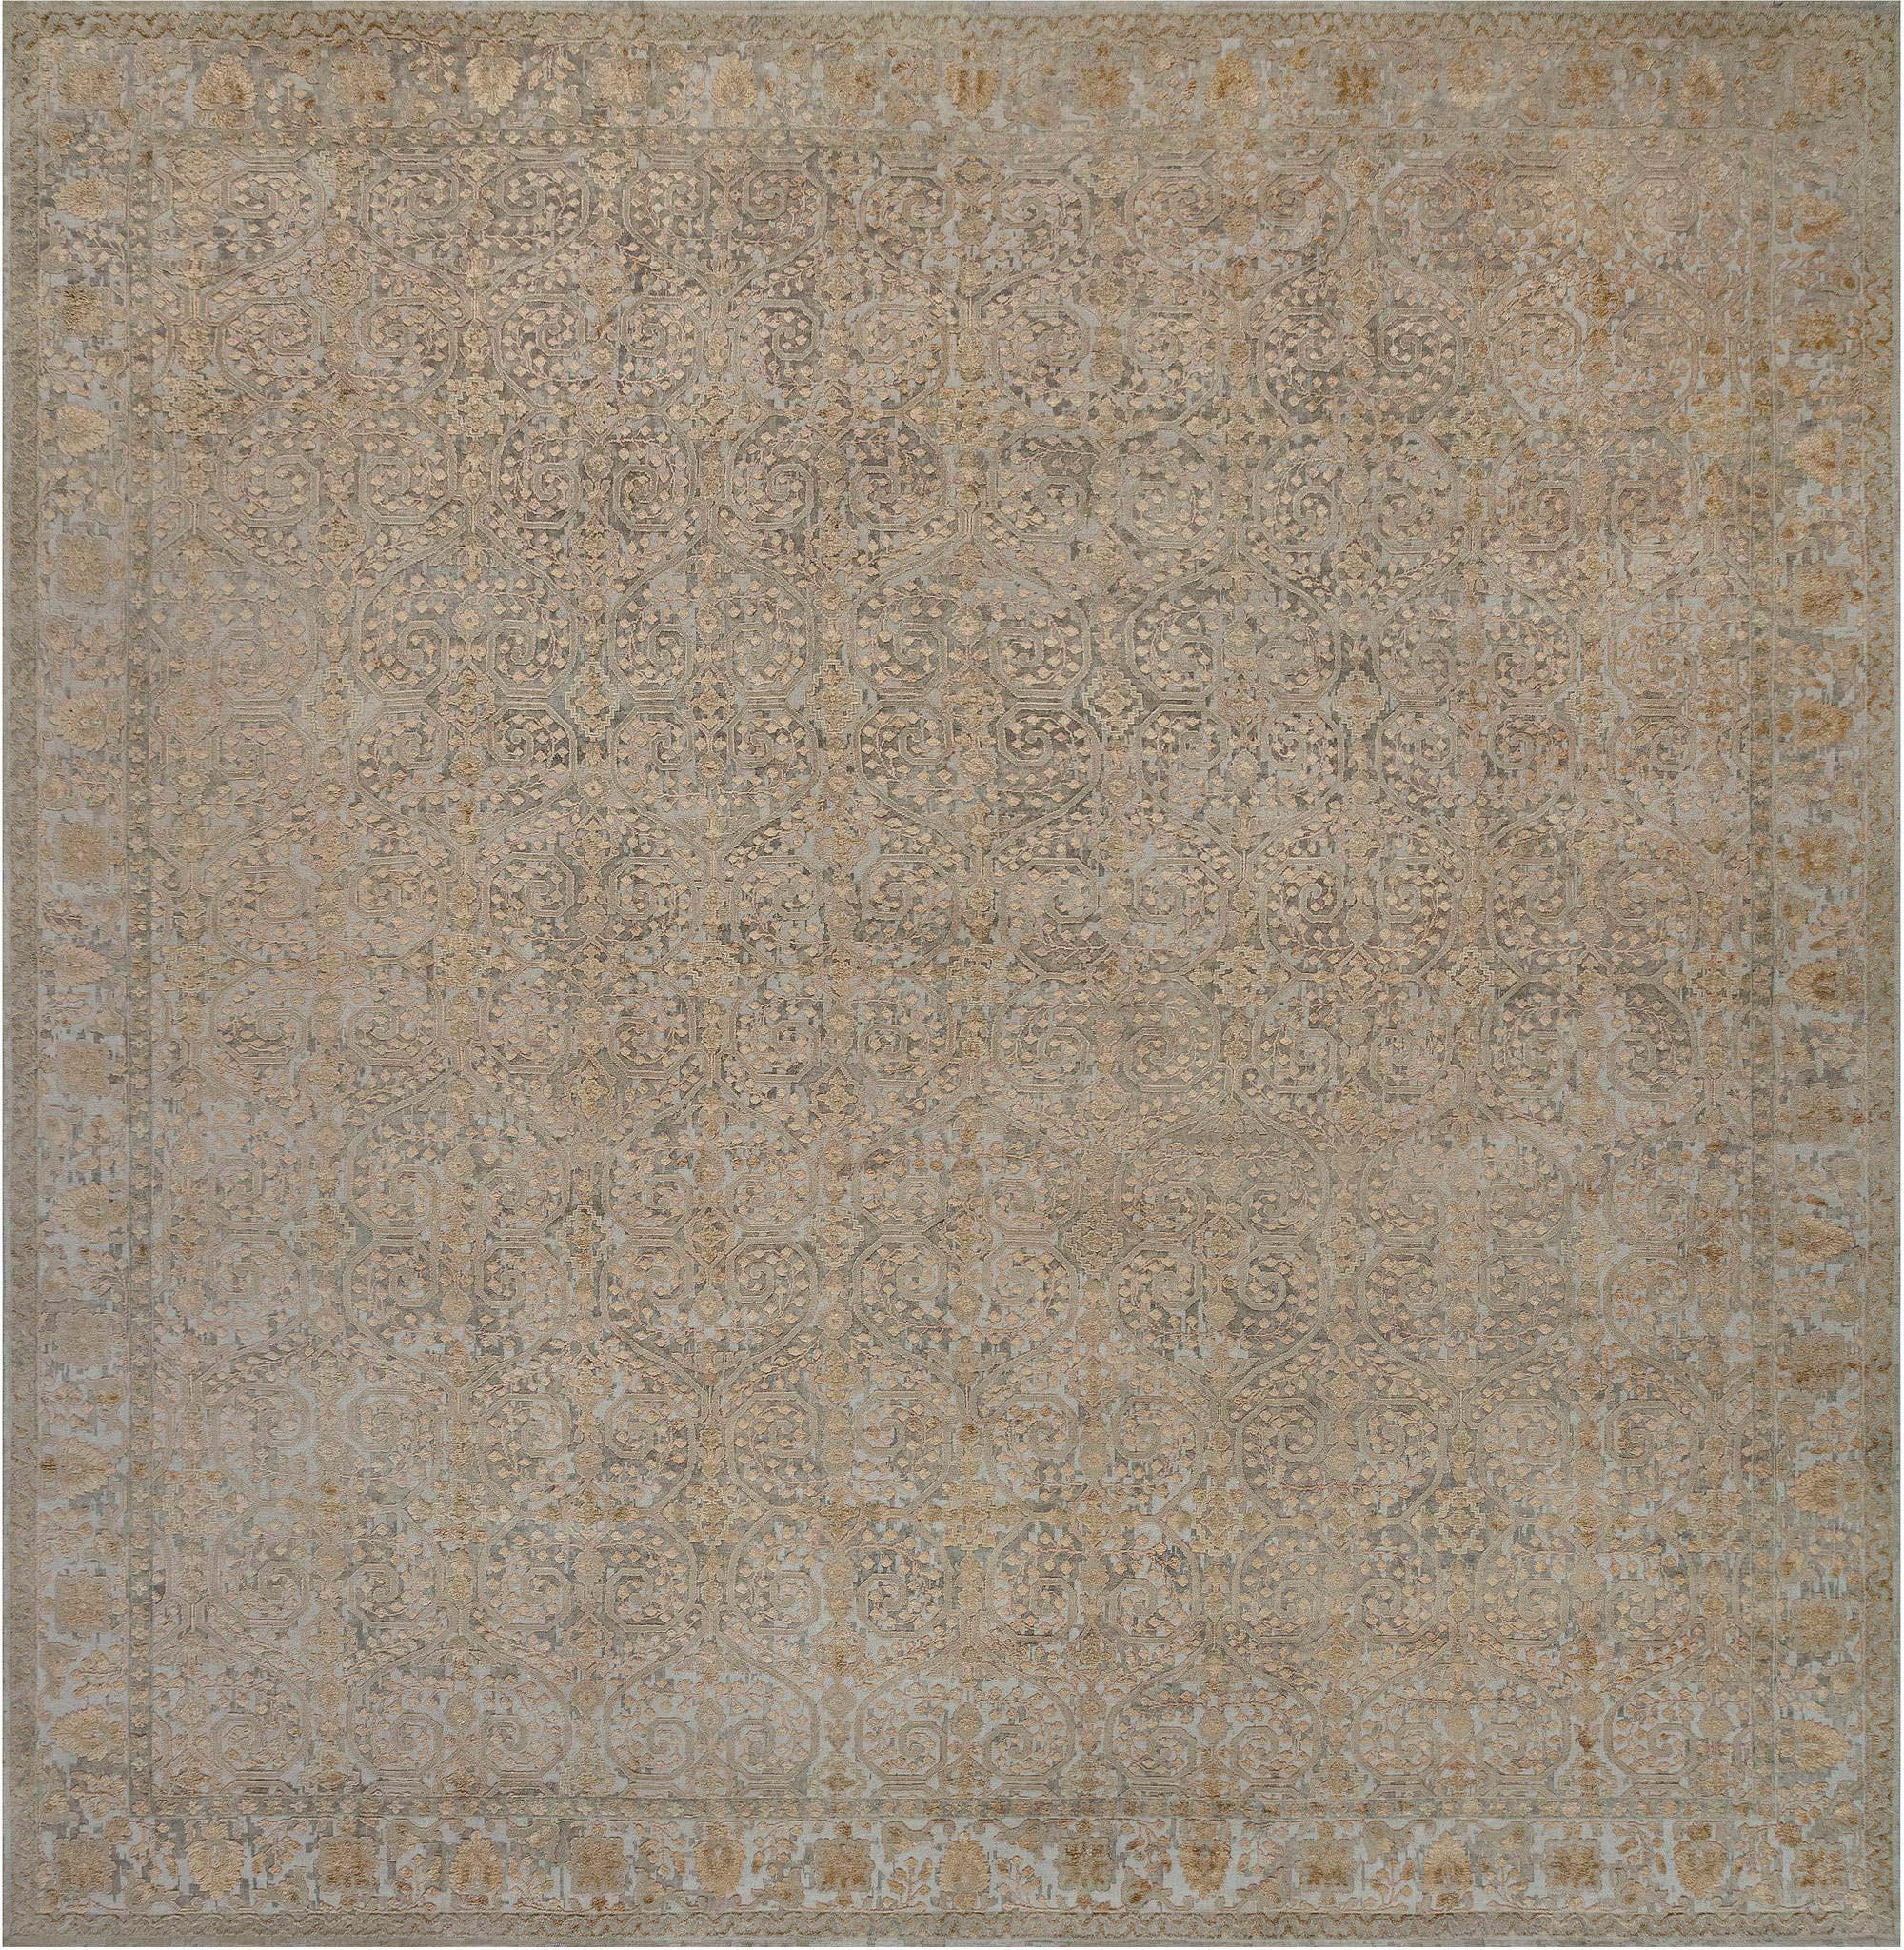 Traditional Inspired Gold Green High-Low Rug by Doris Leslie Blau